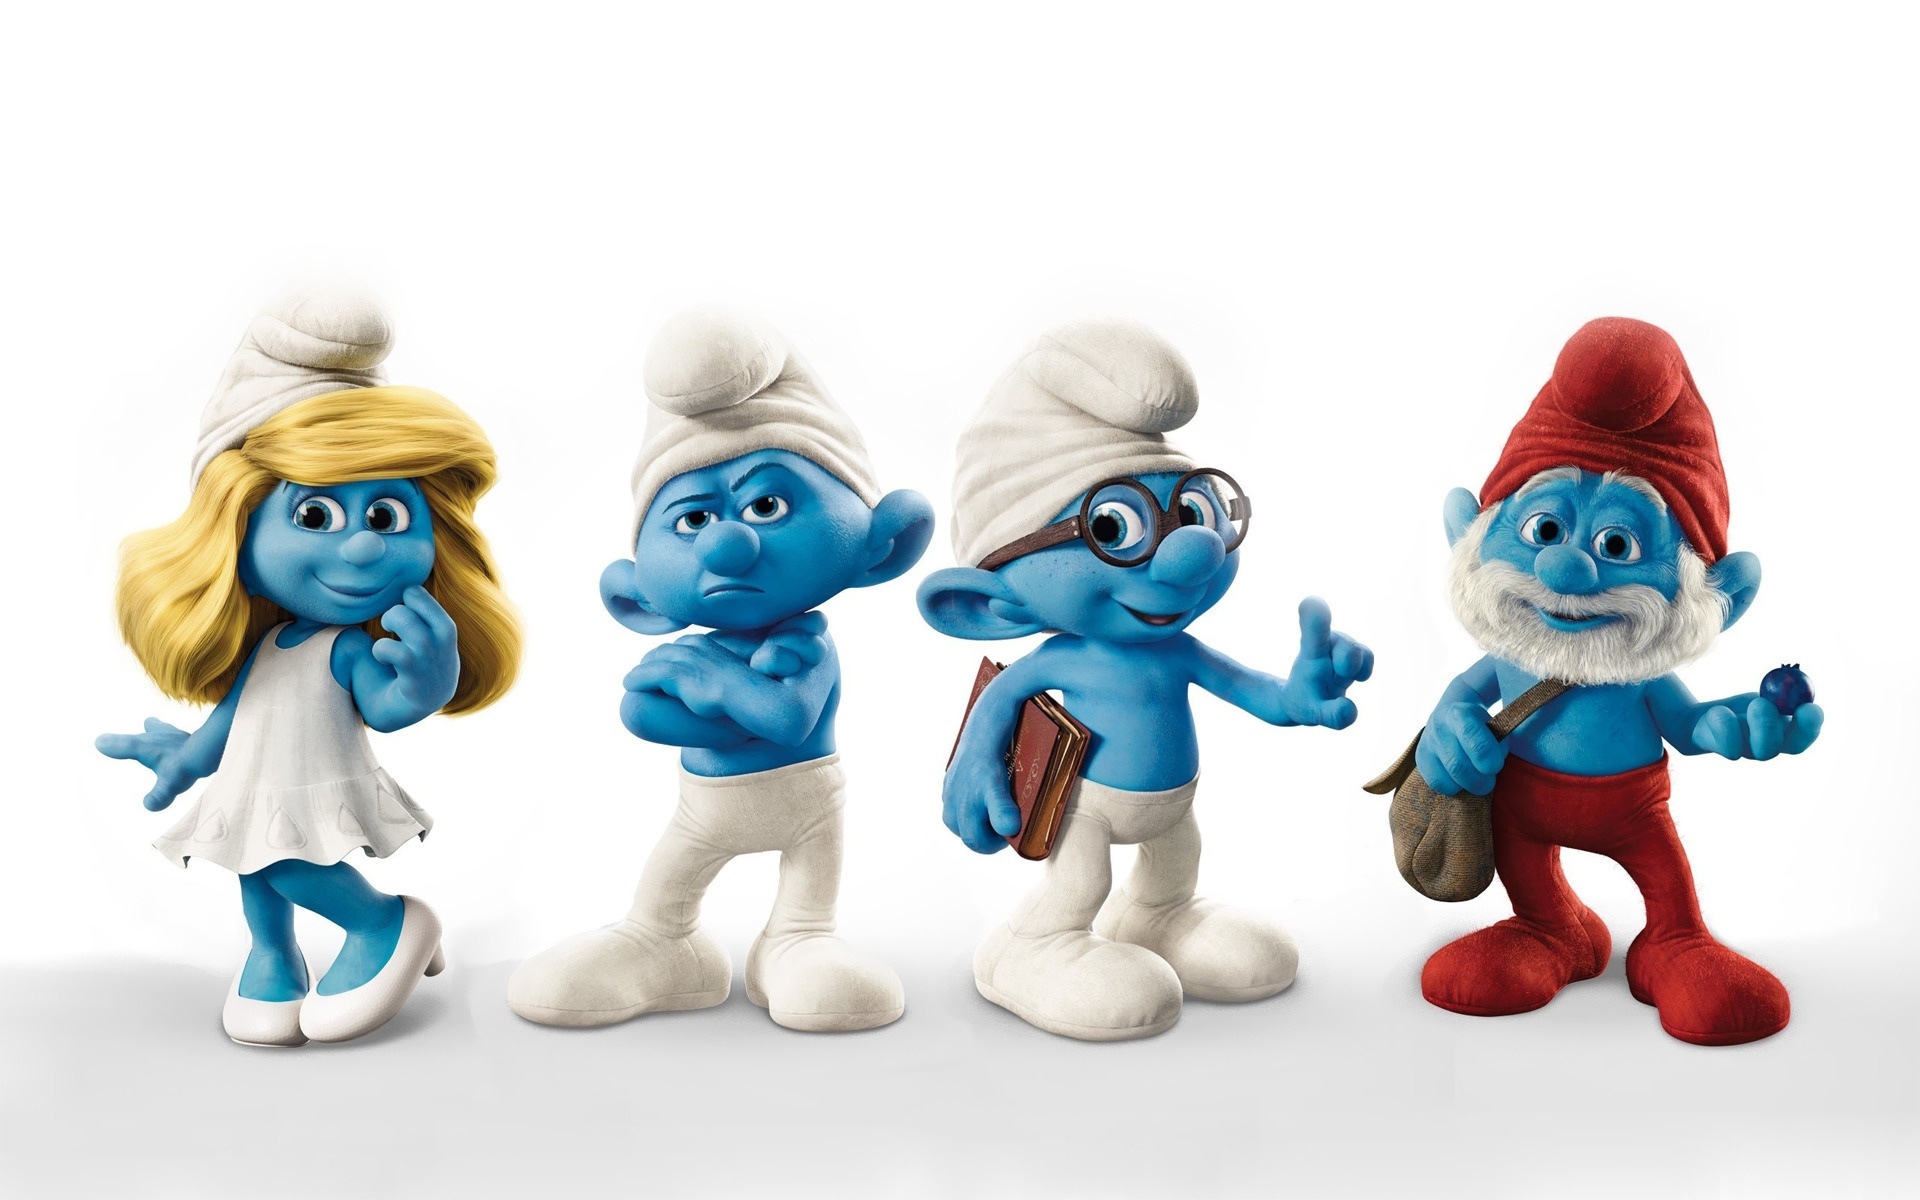 The Smurfs 2 HD movie wallpapers #3 - 1920x1200